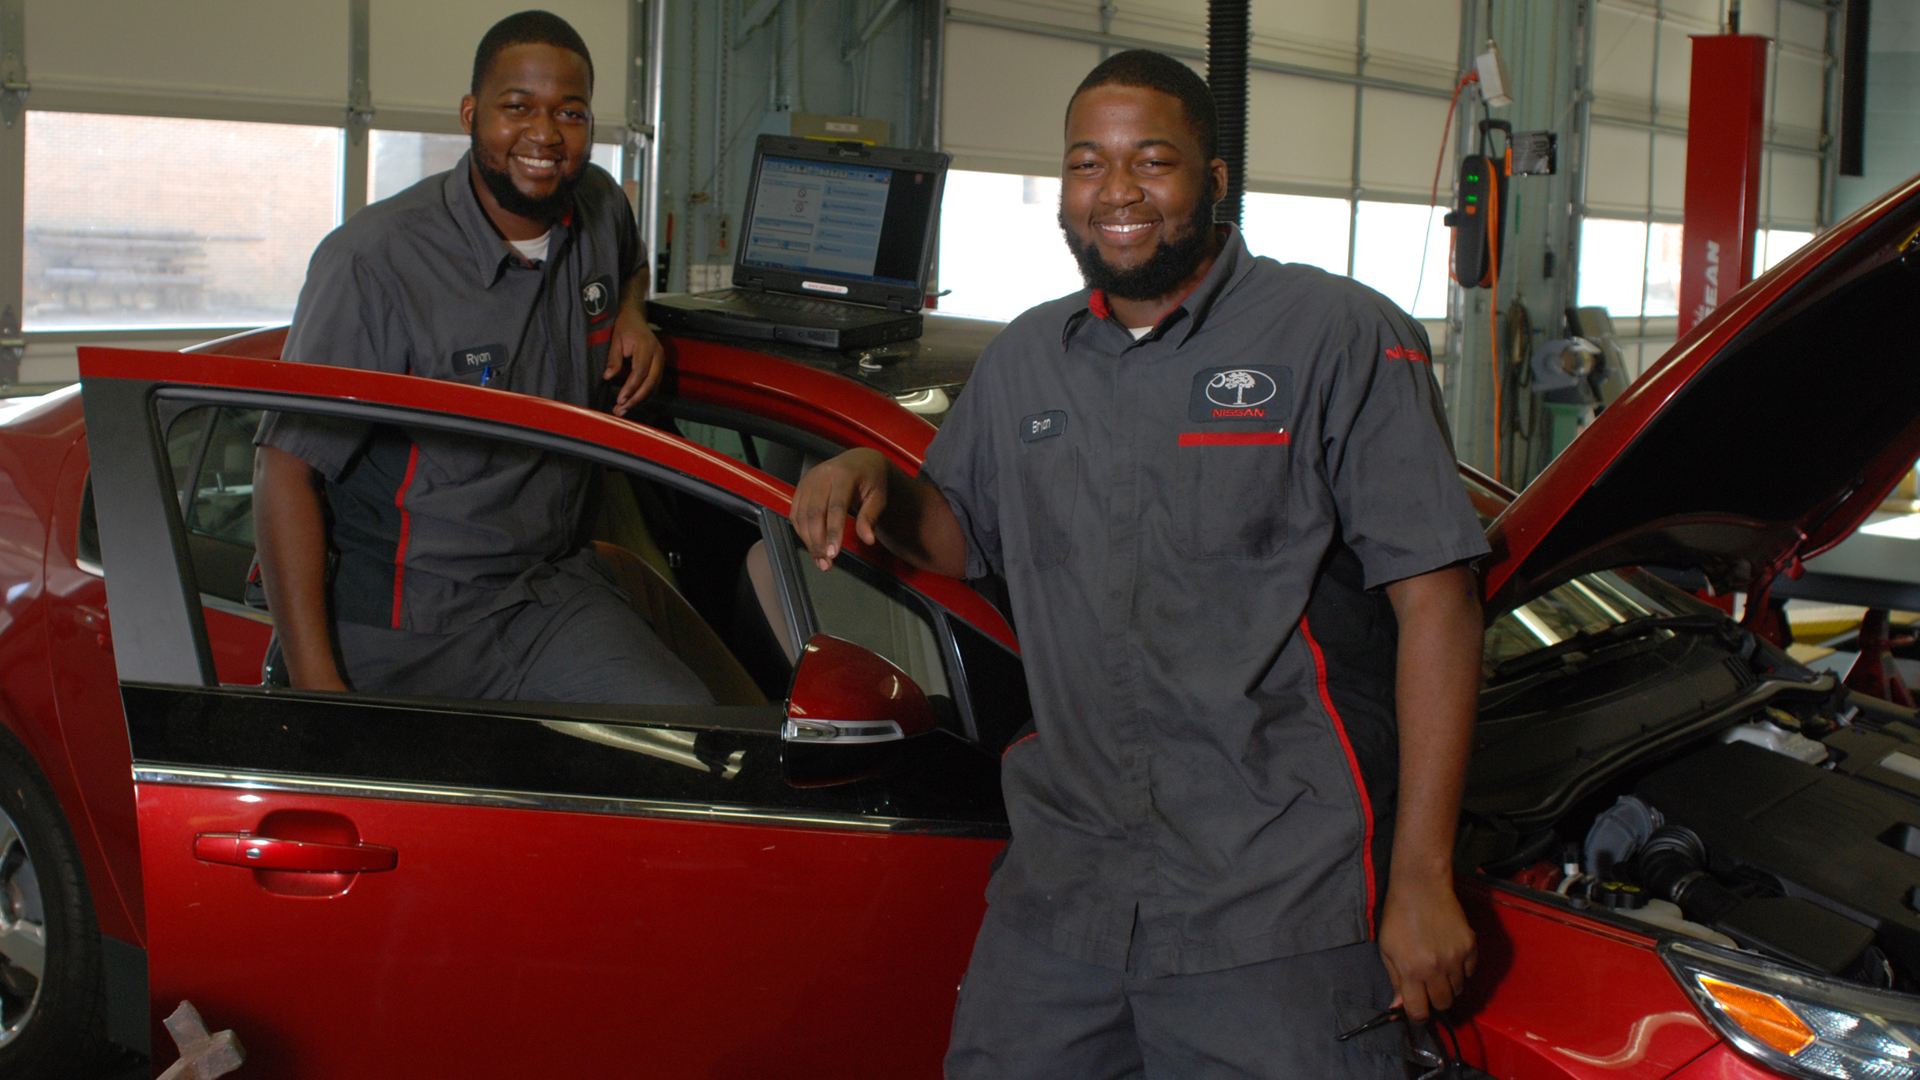  Two auto techs smiling in garage leaning on car